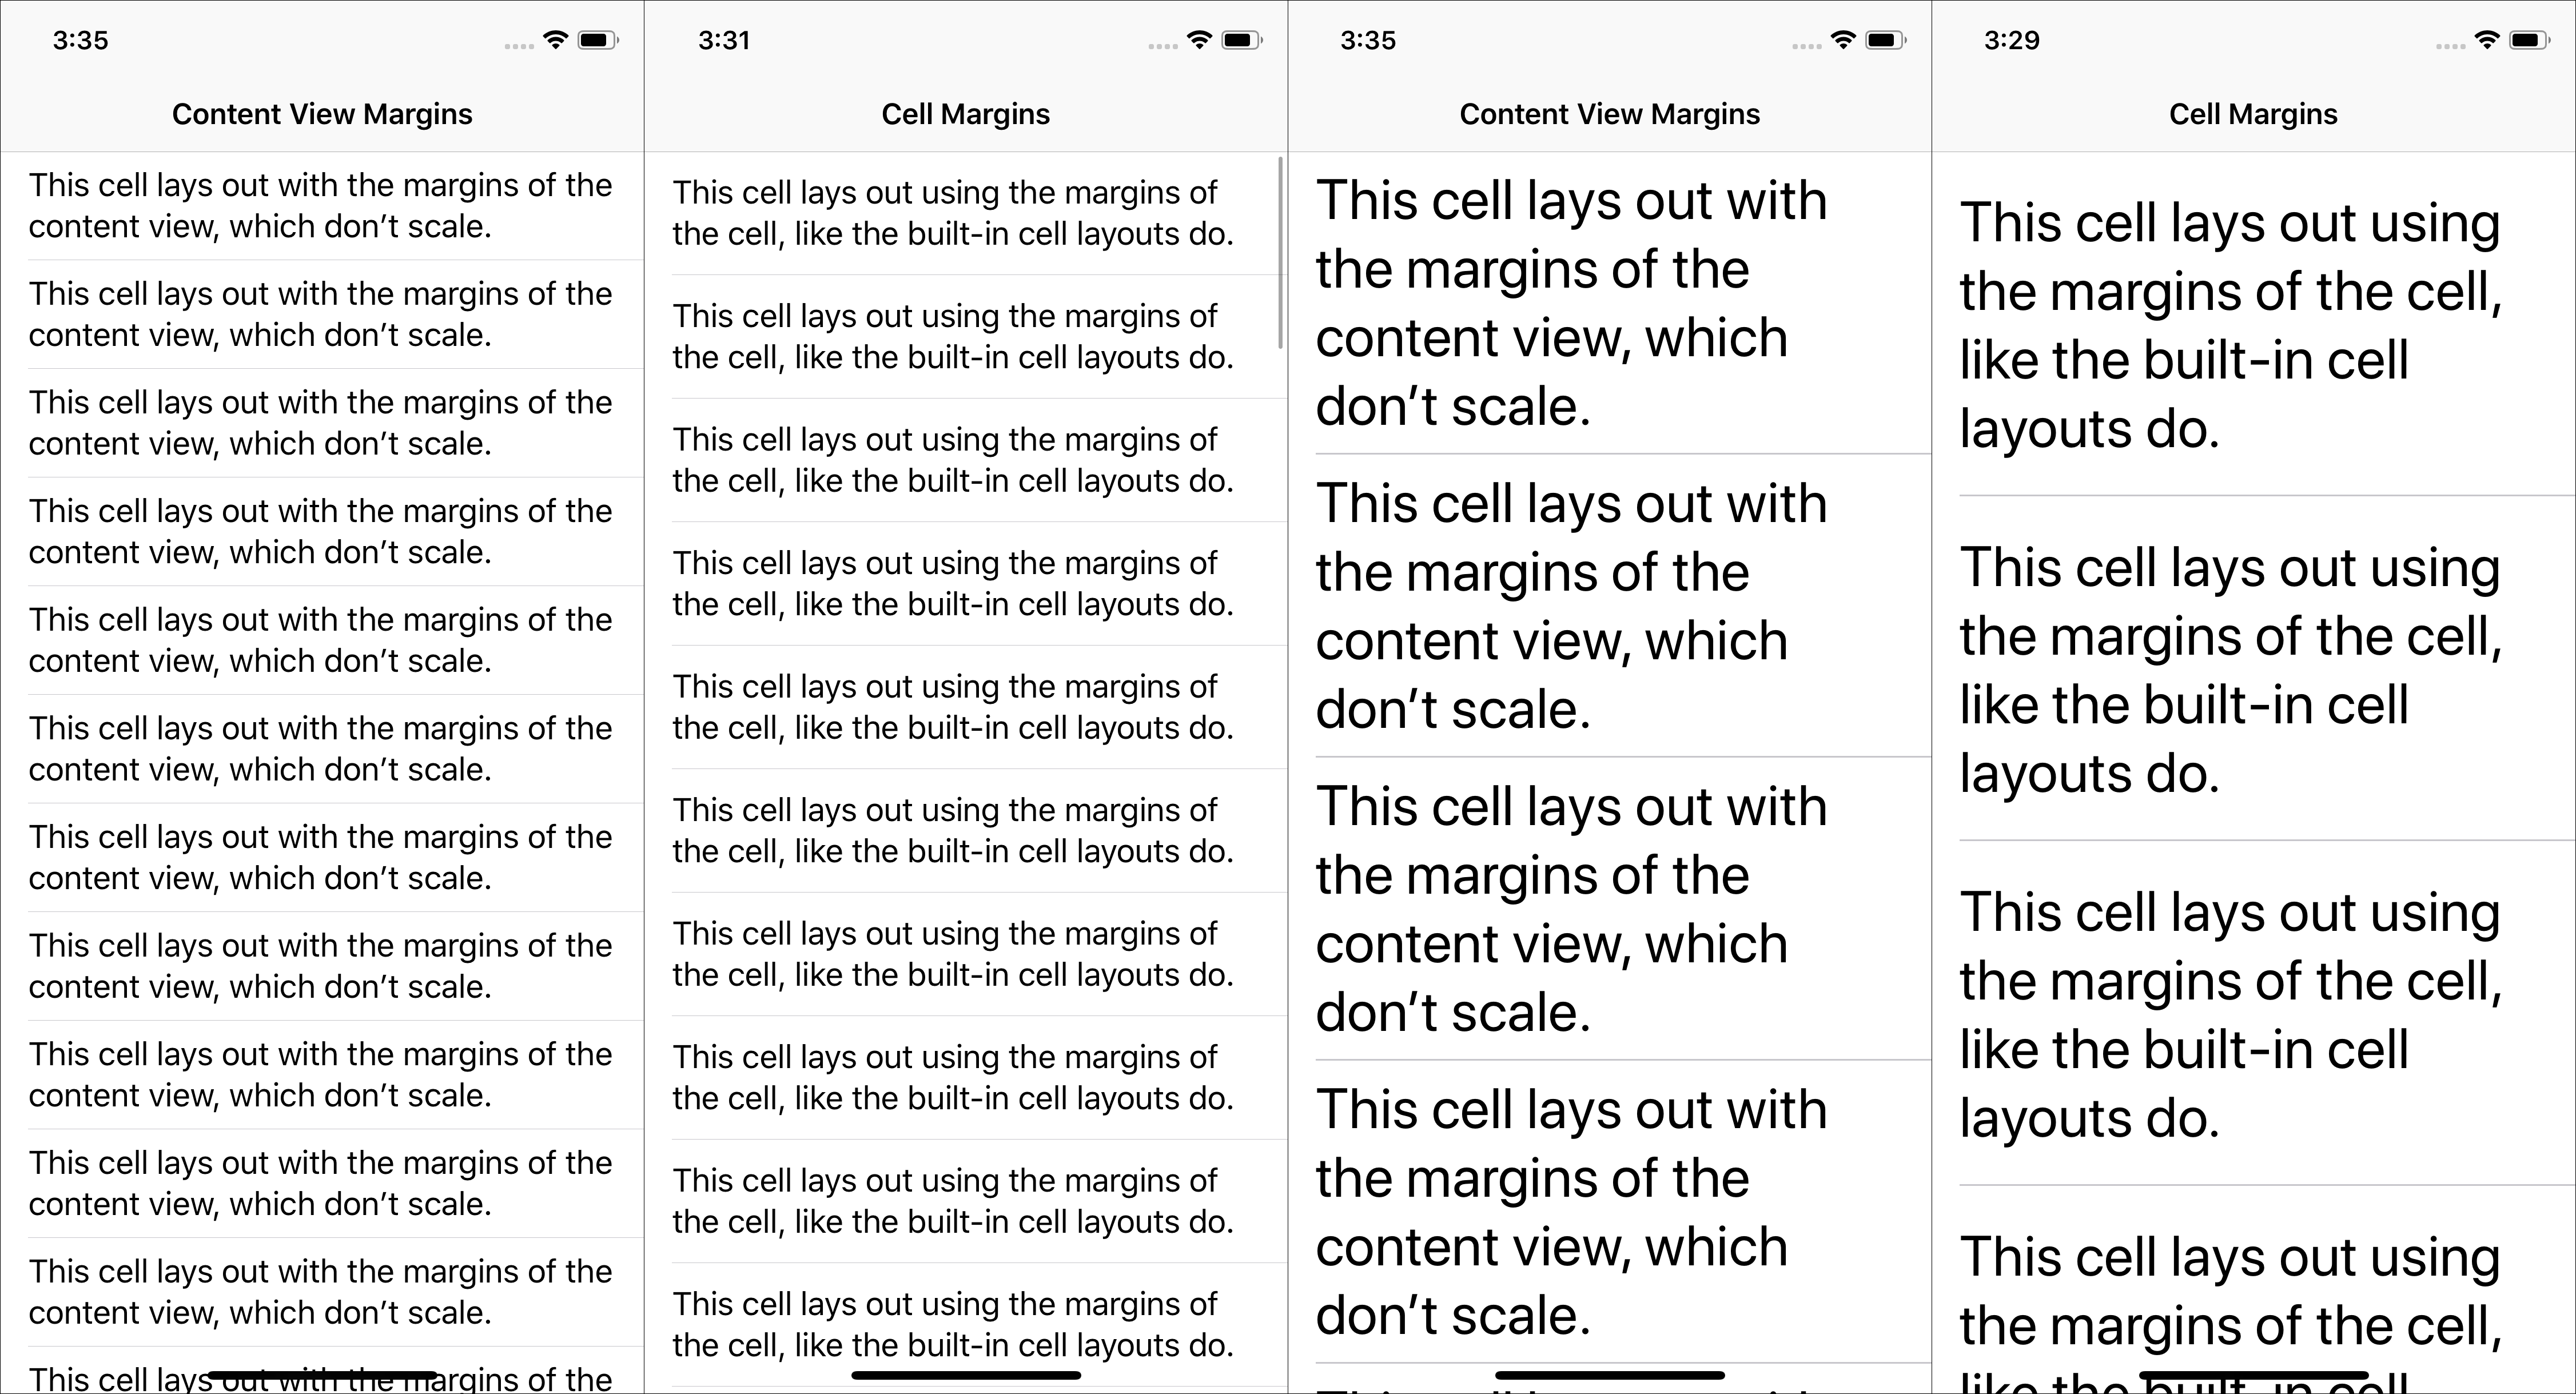 Four screenshots showing cell margins. Two show the content view margins, which are narrower. The other two show the thicker margins of the cells, especially at larger text sizes.